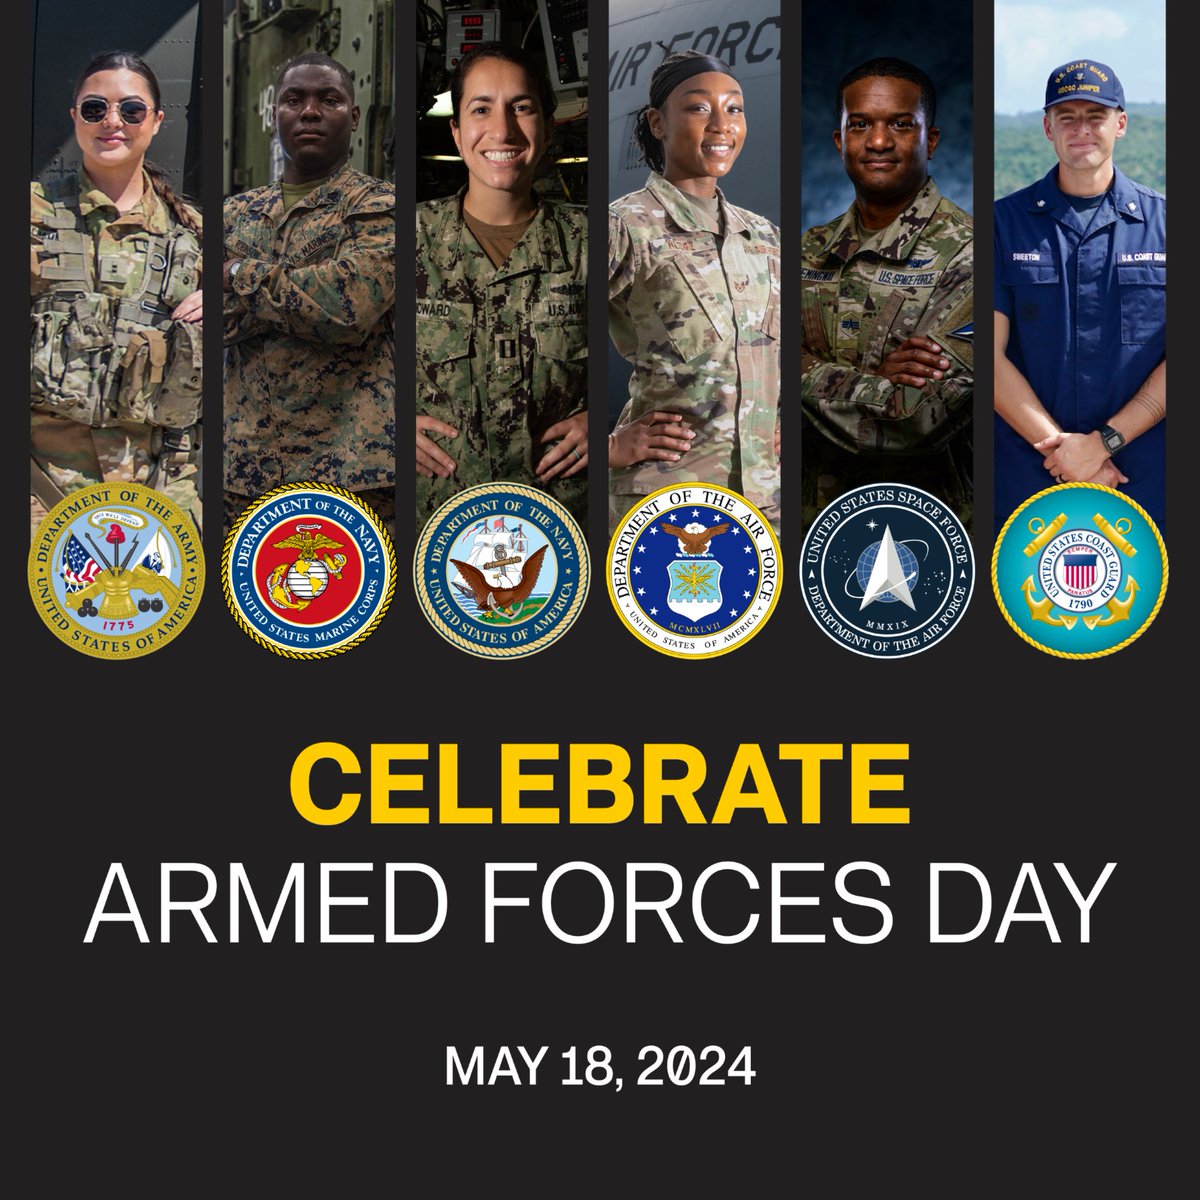 This weekend, we honor the courageous men and women of the U.S. Army and other branches for #ArmedForcesDay. Thank you for your service, dedication, and sacrifice in defending our freedom. #ArmyChaplainCorps | #LandOfTheFree | #HomeOfTheBrave